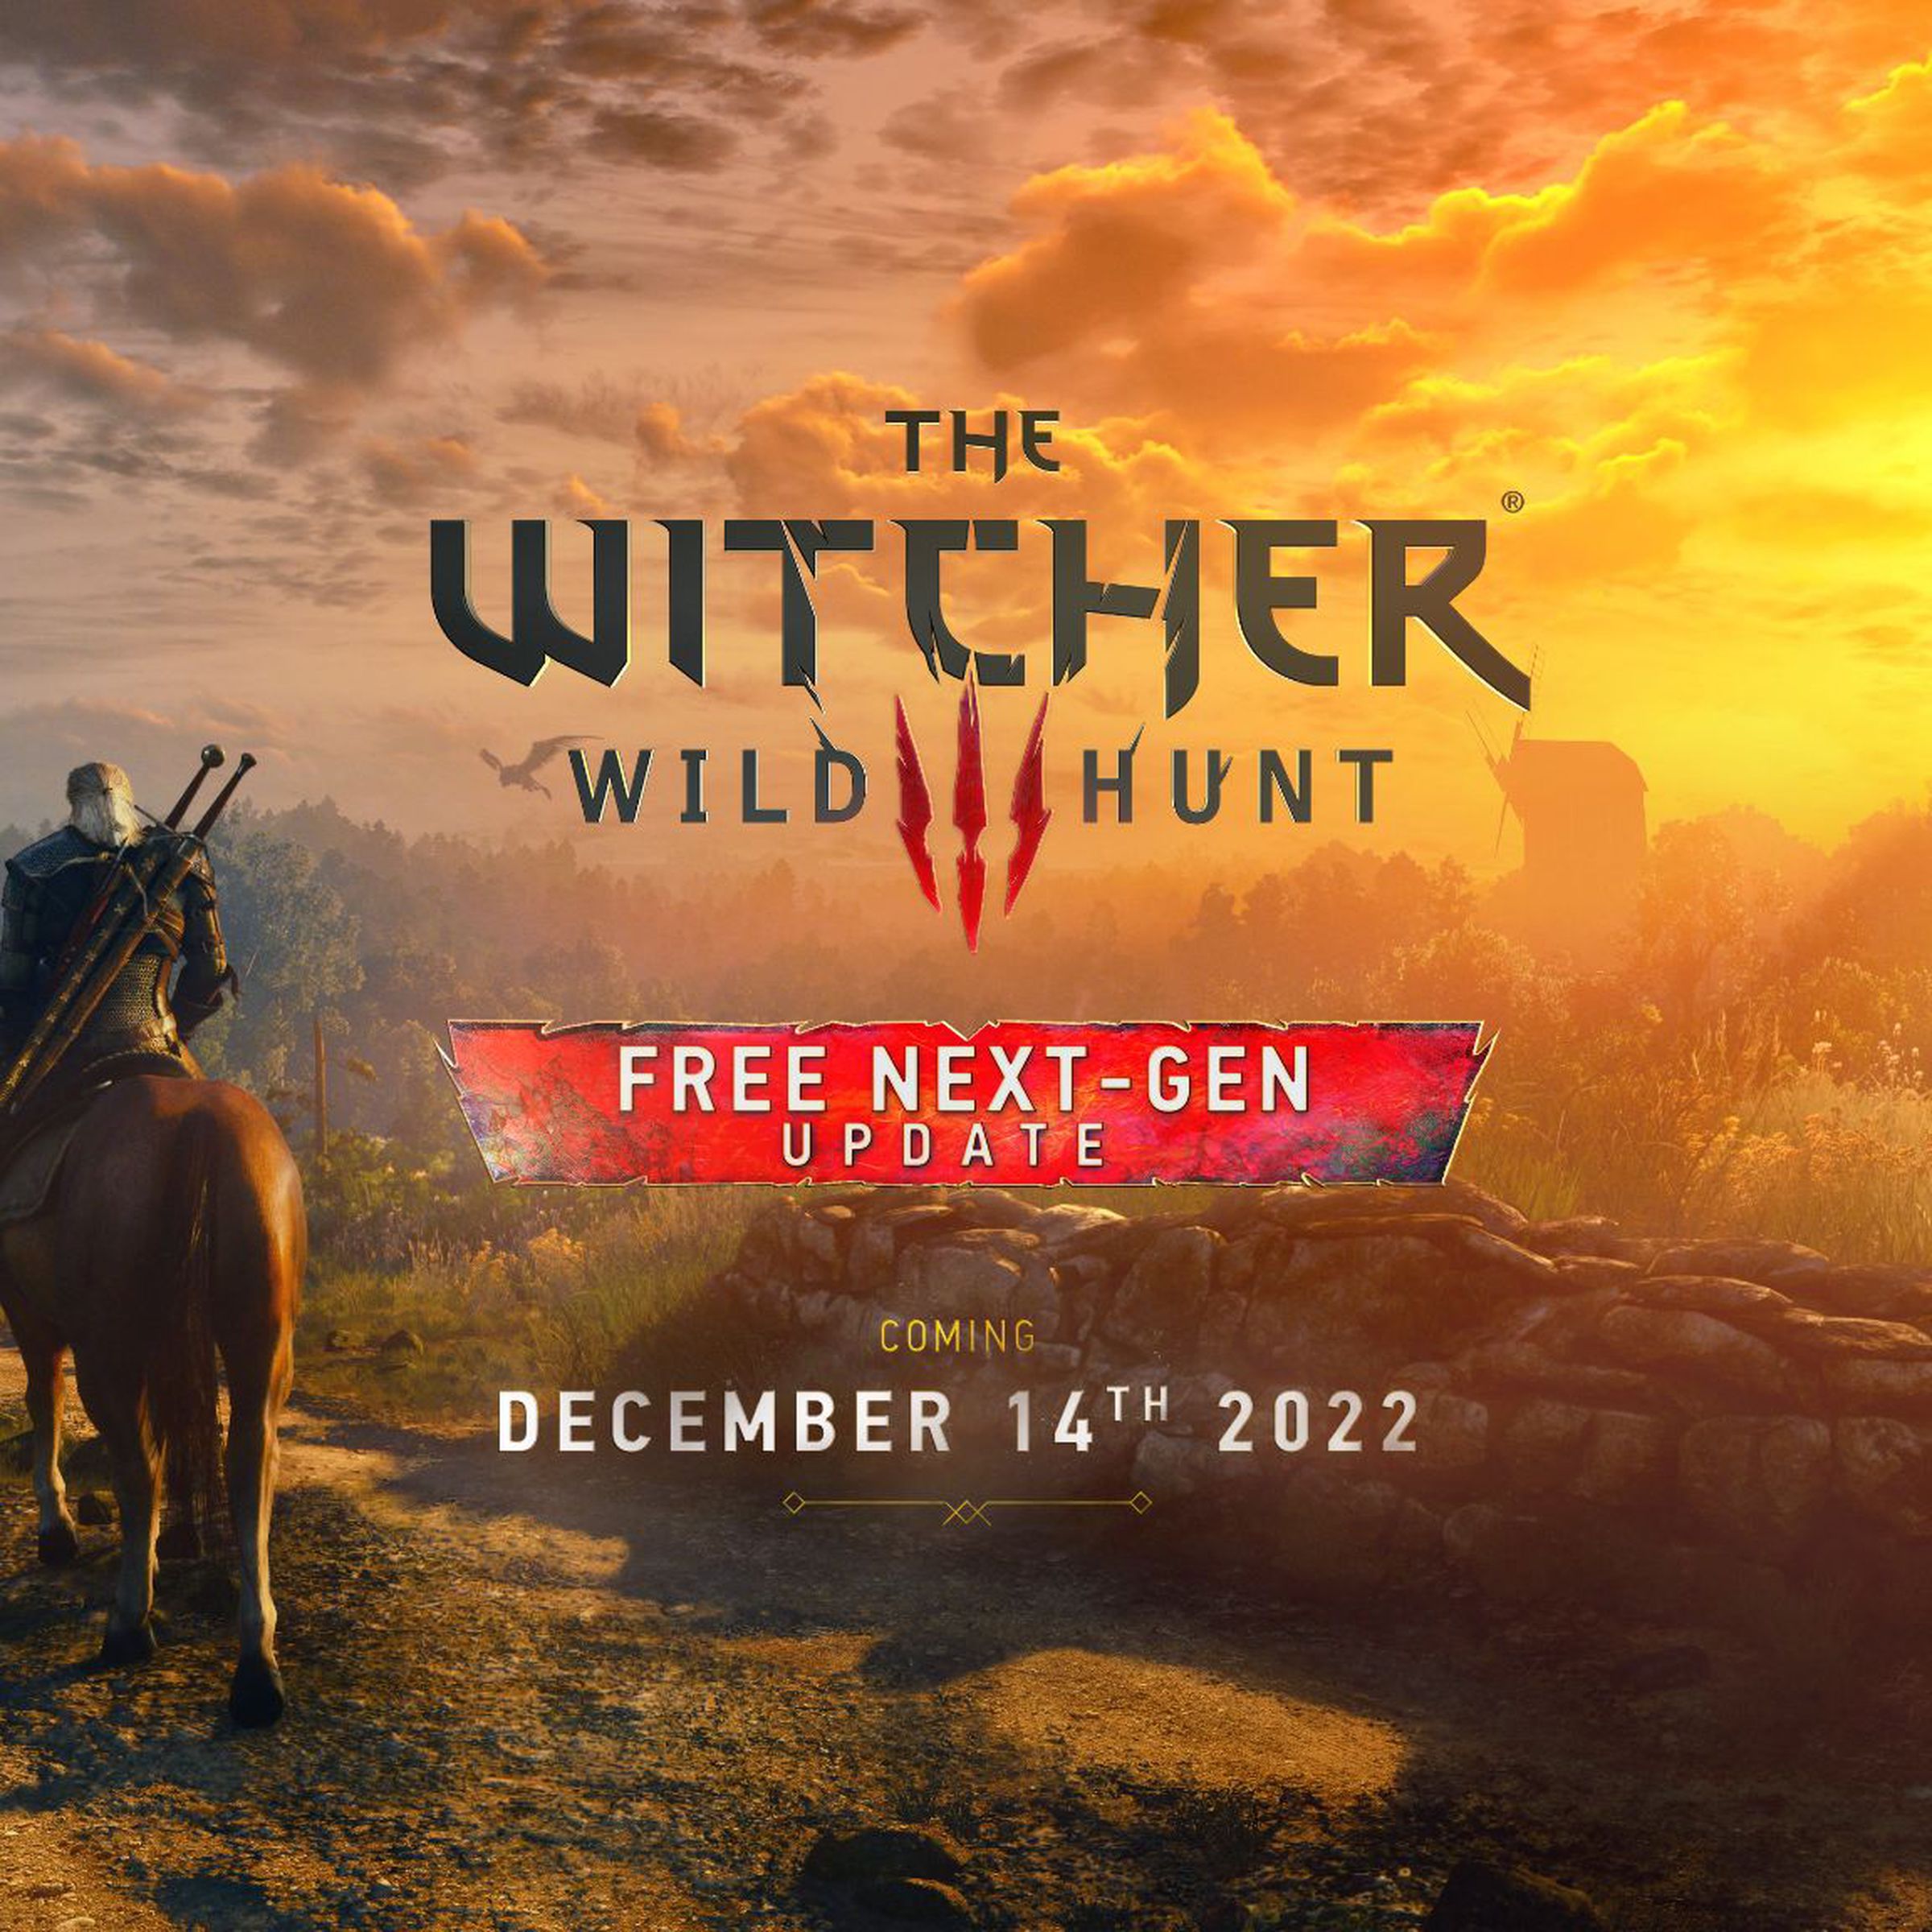 The Witcher 3 next-gen release date is December 14th, 2022. This image shows the release date, along with a screenshot of Geralt riding on Roach the horse during a scenic sunset.